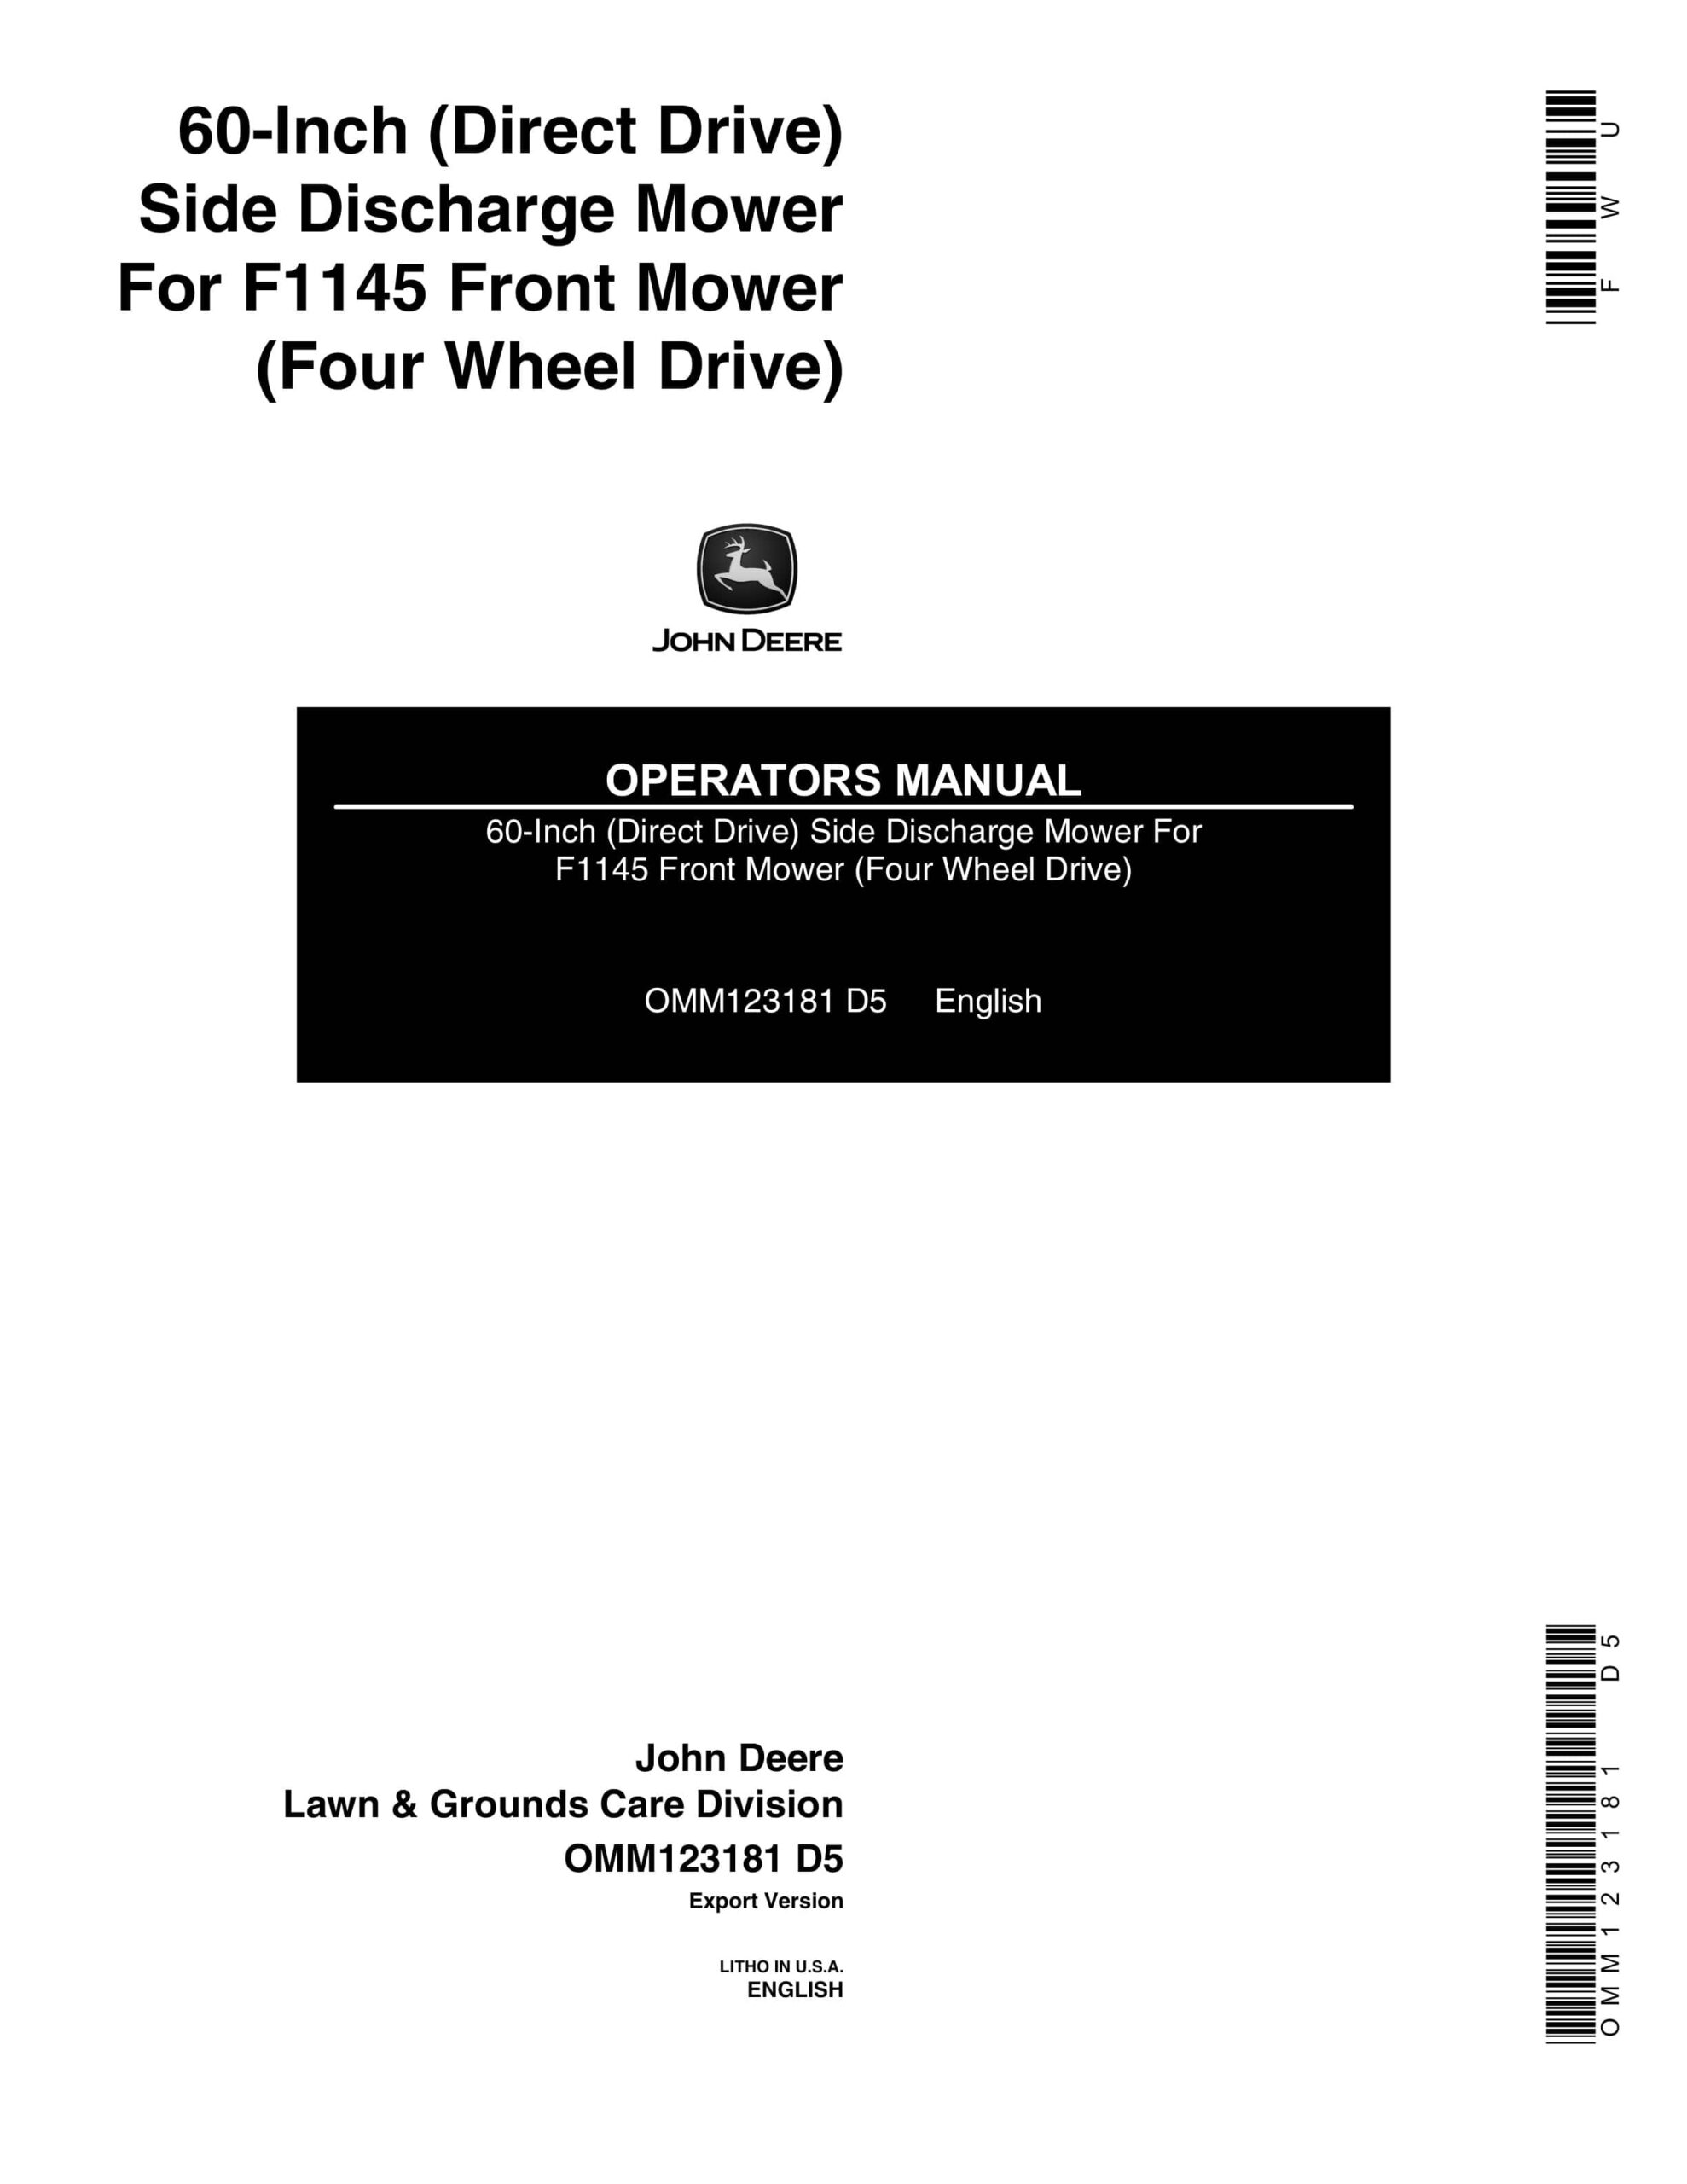 John Deere 60-Inch (Direct Drive) Side Discharge Mower For F1145 Front Mower (Four Wheel Drive) Operator Manual OMM123181-1